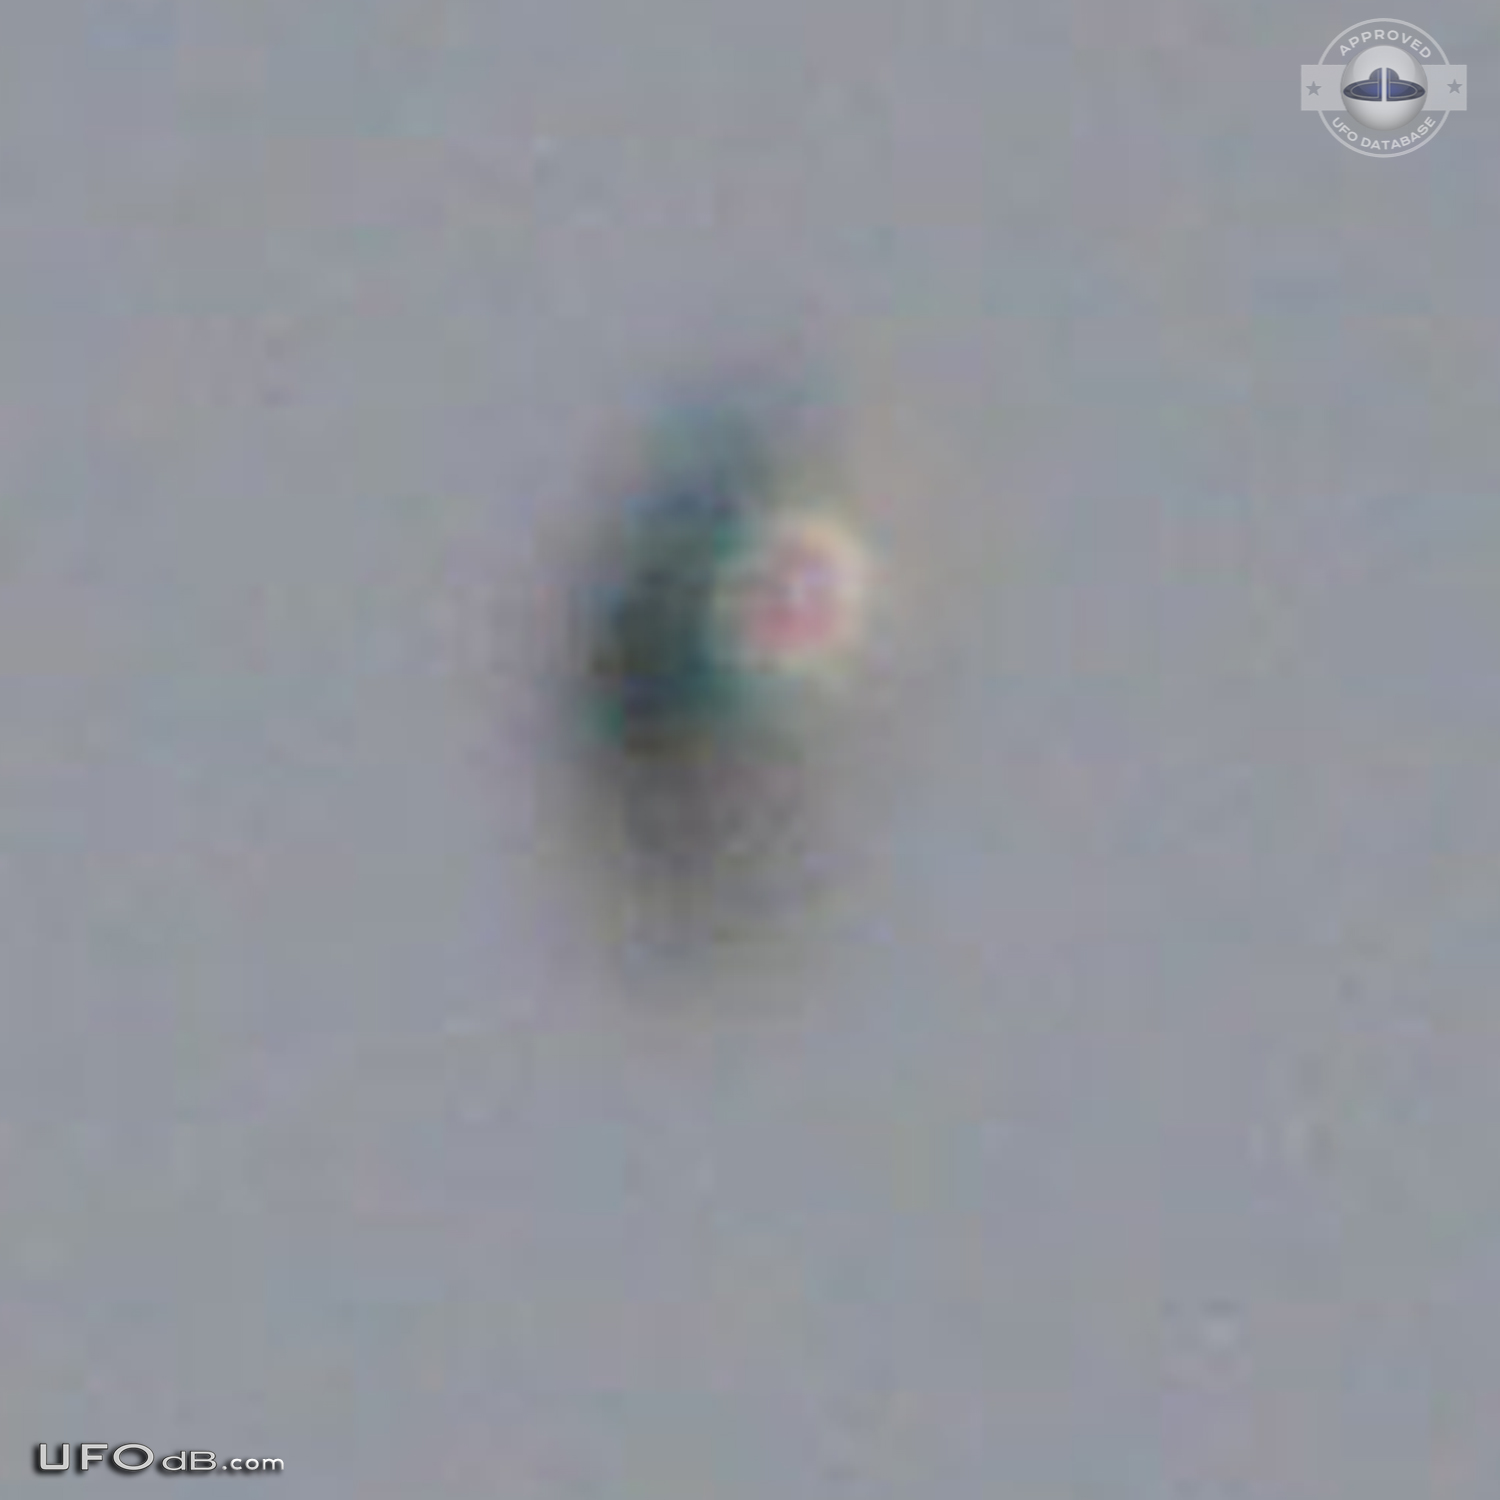 Shiny Upside-down Teardrop UFO rotating in the sky San Marcos CA USA UFO Picture #623-4